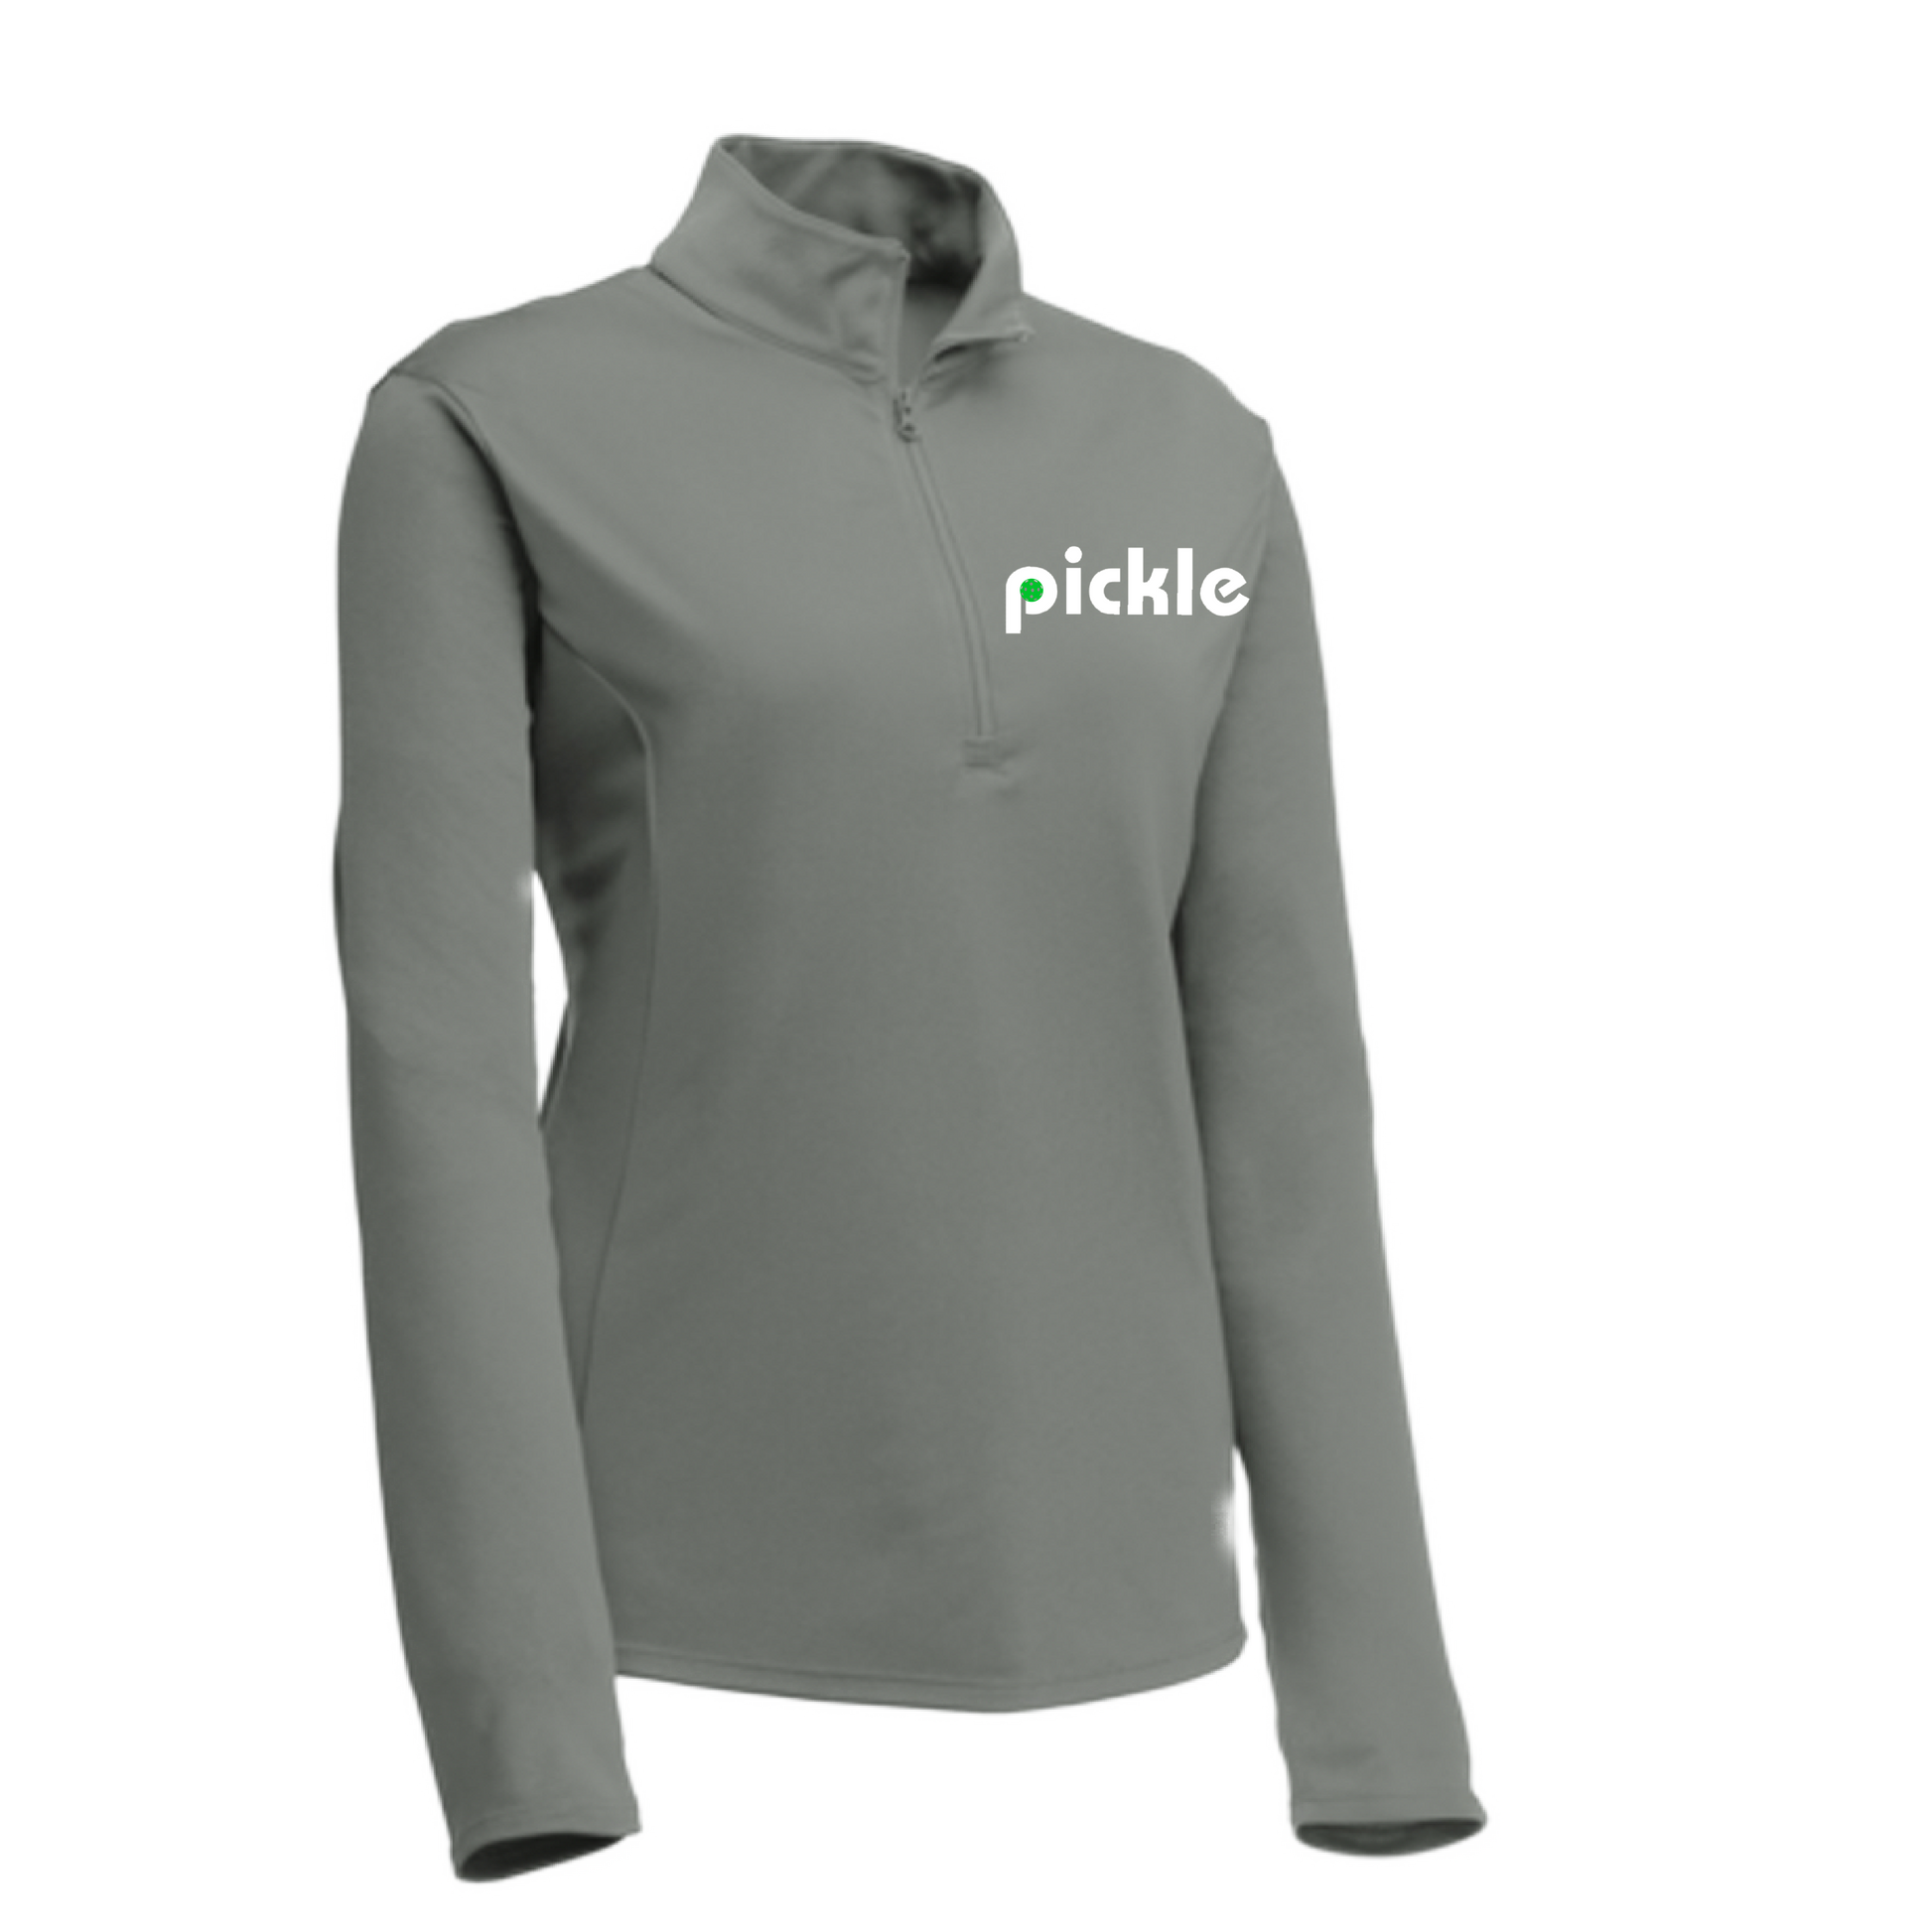 Revel in the feel of this Women's pickleball shirt, where softness and flair work in perfect harmony. Don't worry about sweat, the material is moisture-wicking and luxuriously soft. Color won't fade thanks to PosiCharge technology and you won't overheat in its ultra-breathable lightweight design. Rock it year-round!